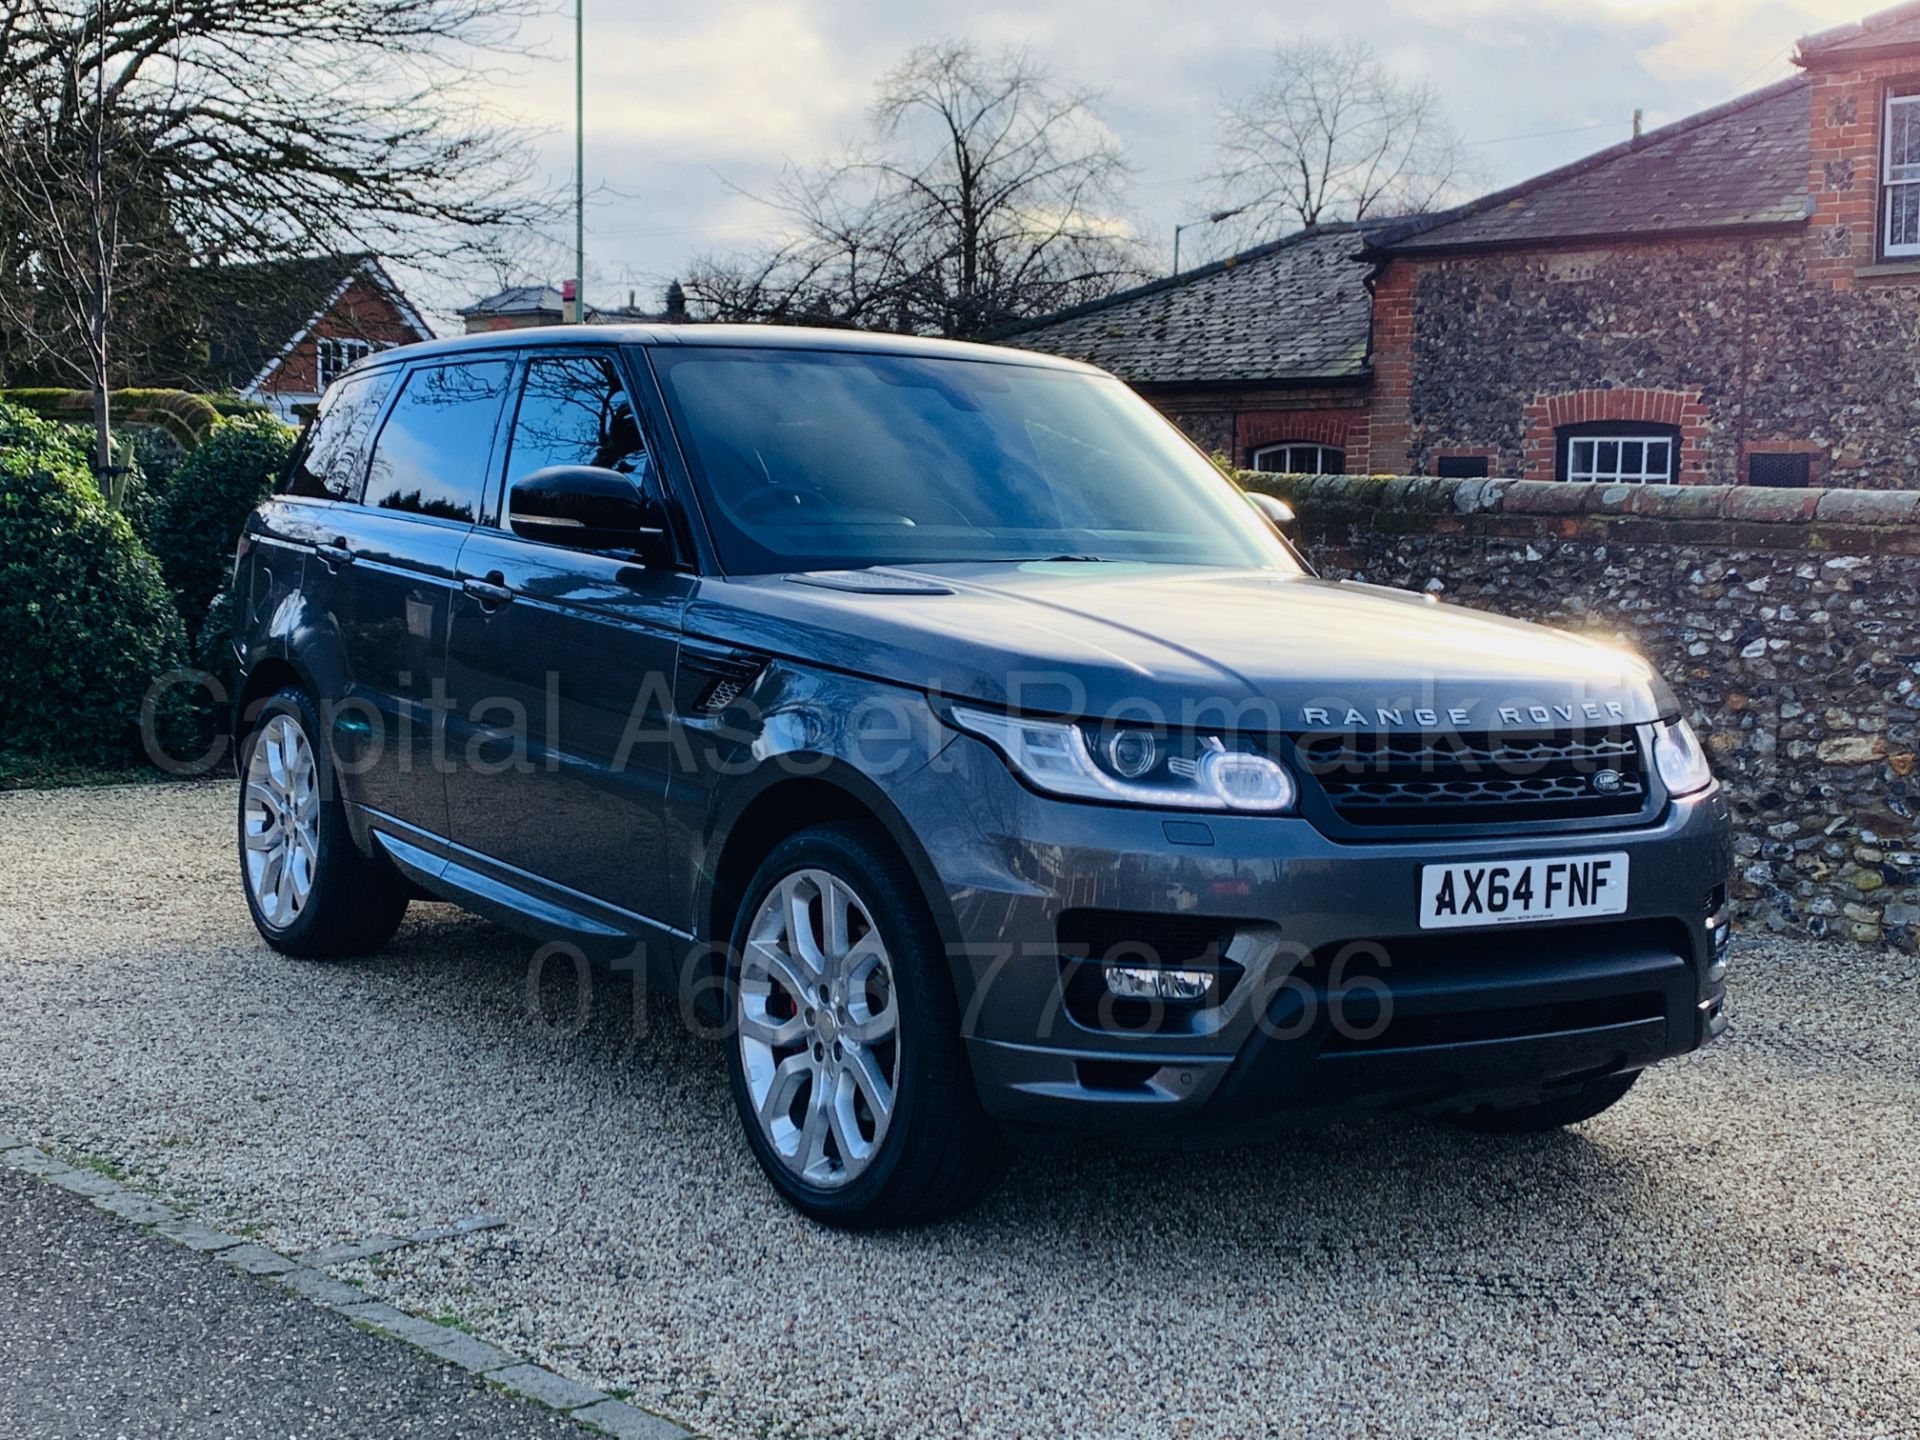 On Sale RANGE ROVER SPORT *AUTOBIOGRAPHY DYNAMIC* (2015 MODEL) '3.0 SDV6 - 8 SPEED AUTO' HIGE SPEC - Image 4 of 85